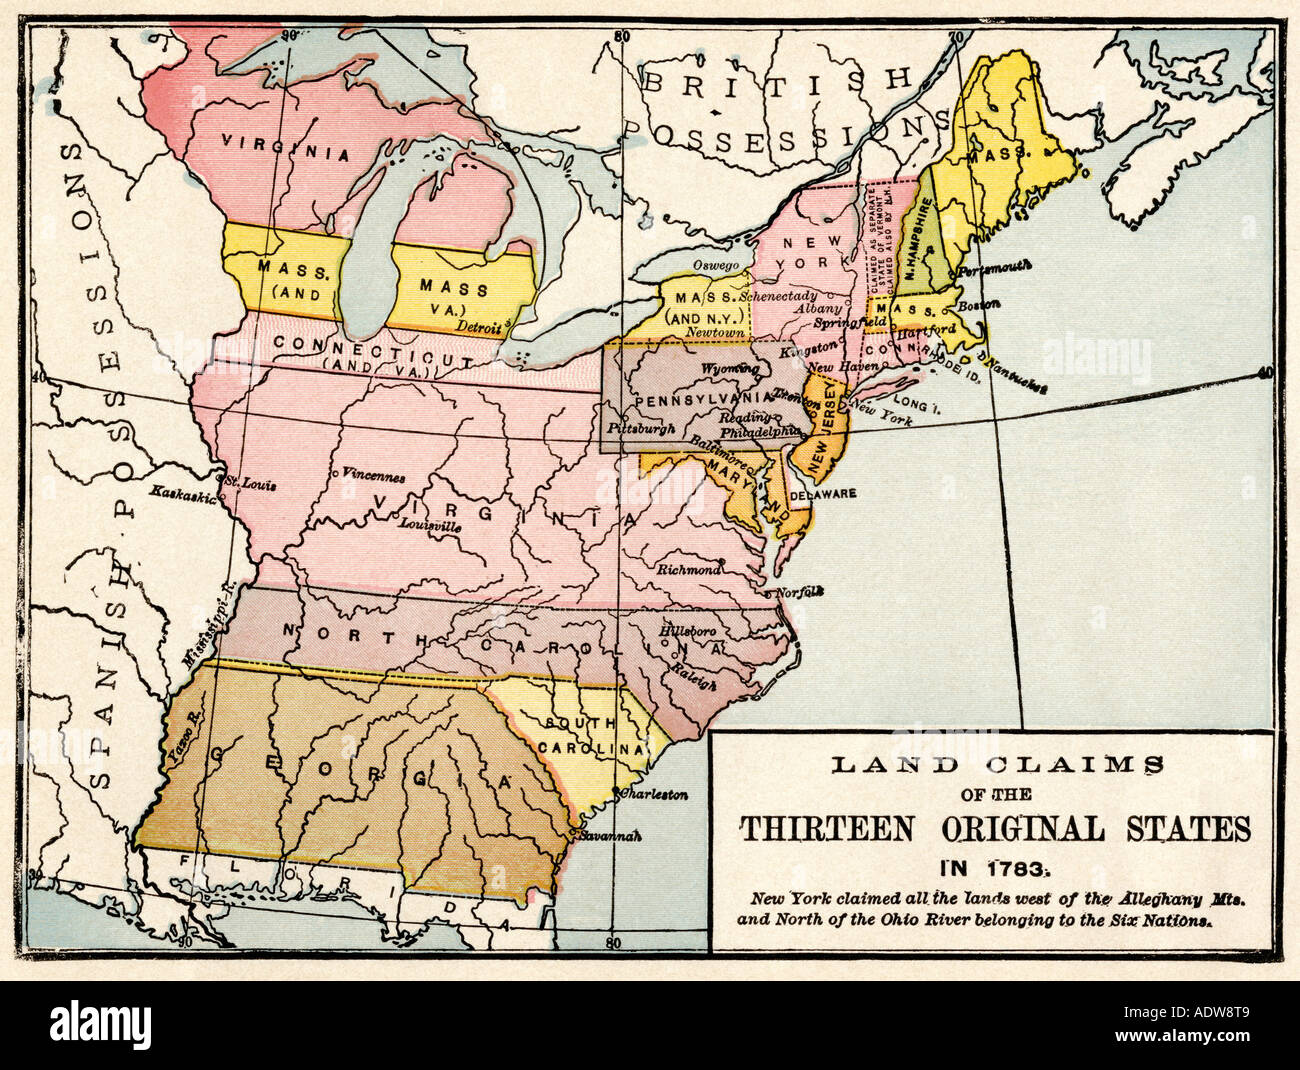 Map showing land claims of the thirteen original states 1783. Color lithograph Stock Photo